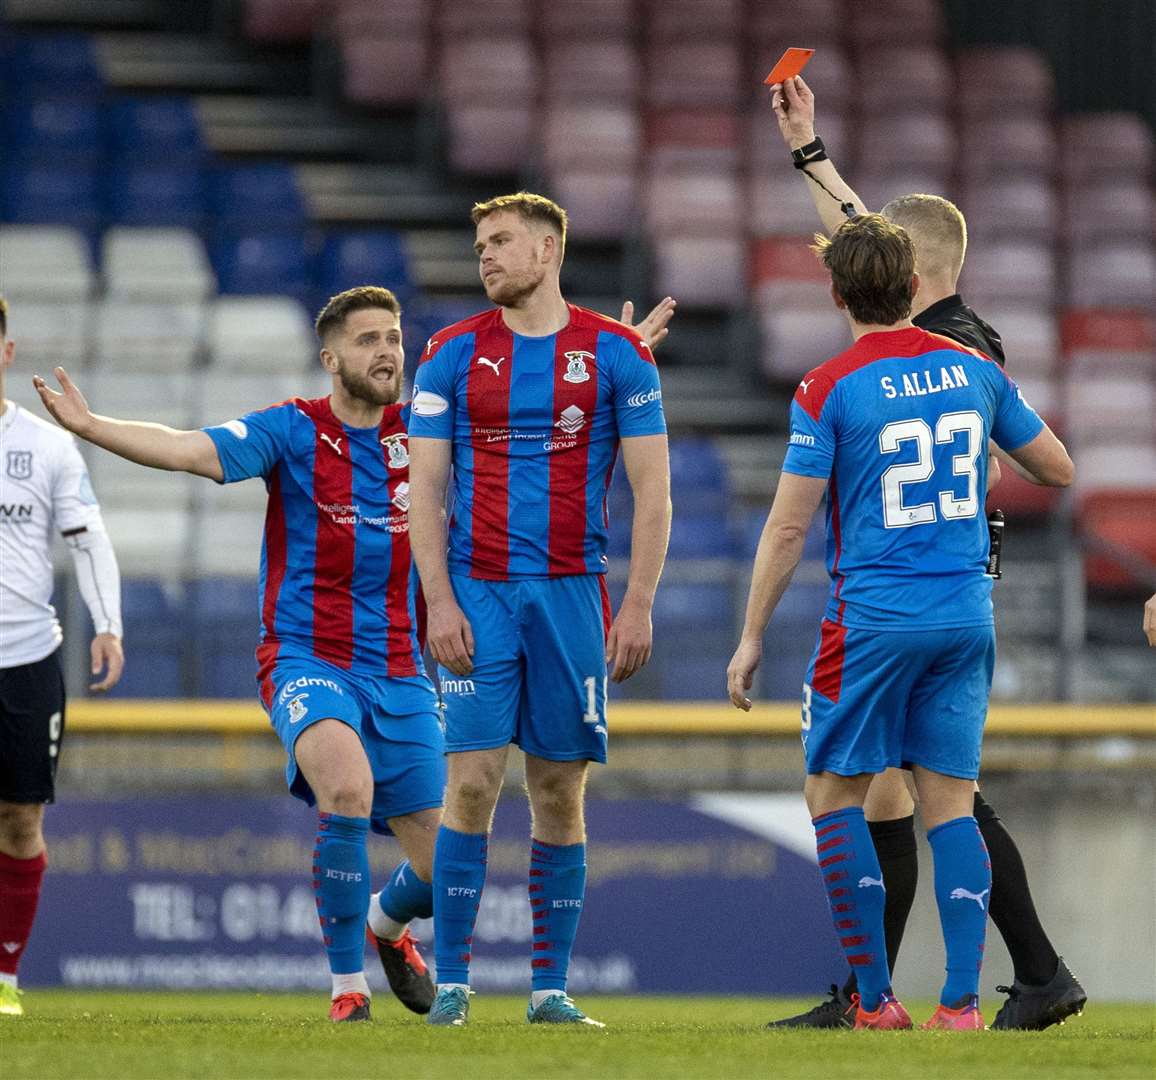 Picture - Ken Macpherson, Inverness. Inverness CT(1) v Dundee(1). 20.04.21. ICT’s Scott Allardice is shown the red card by referee Mike Roncone.